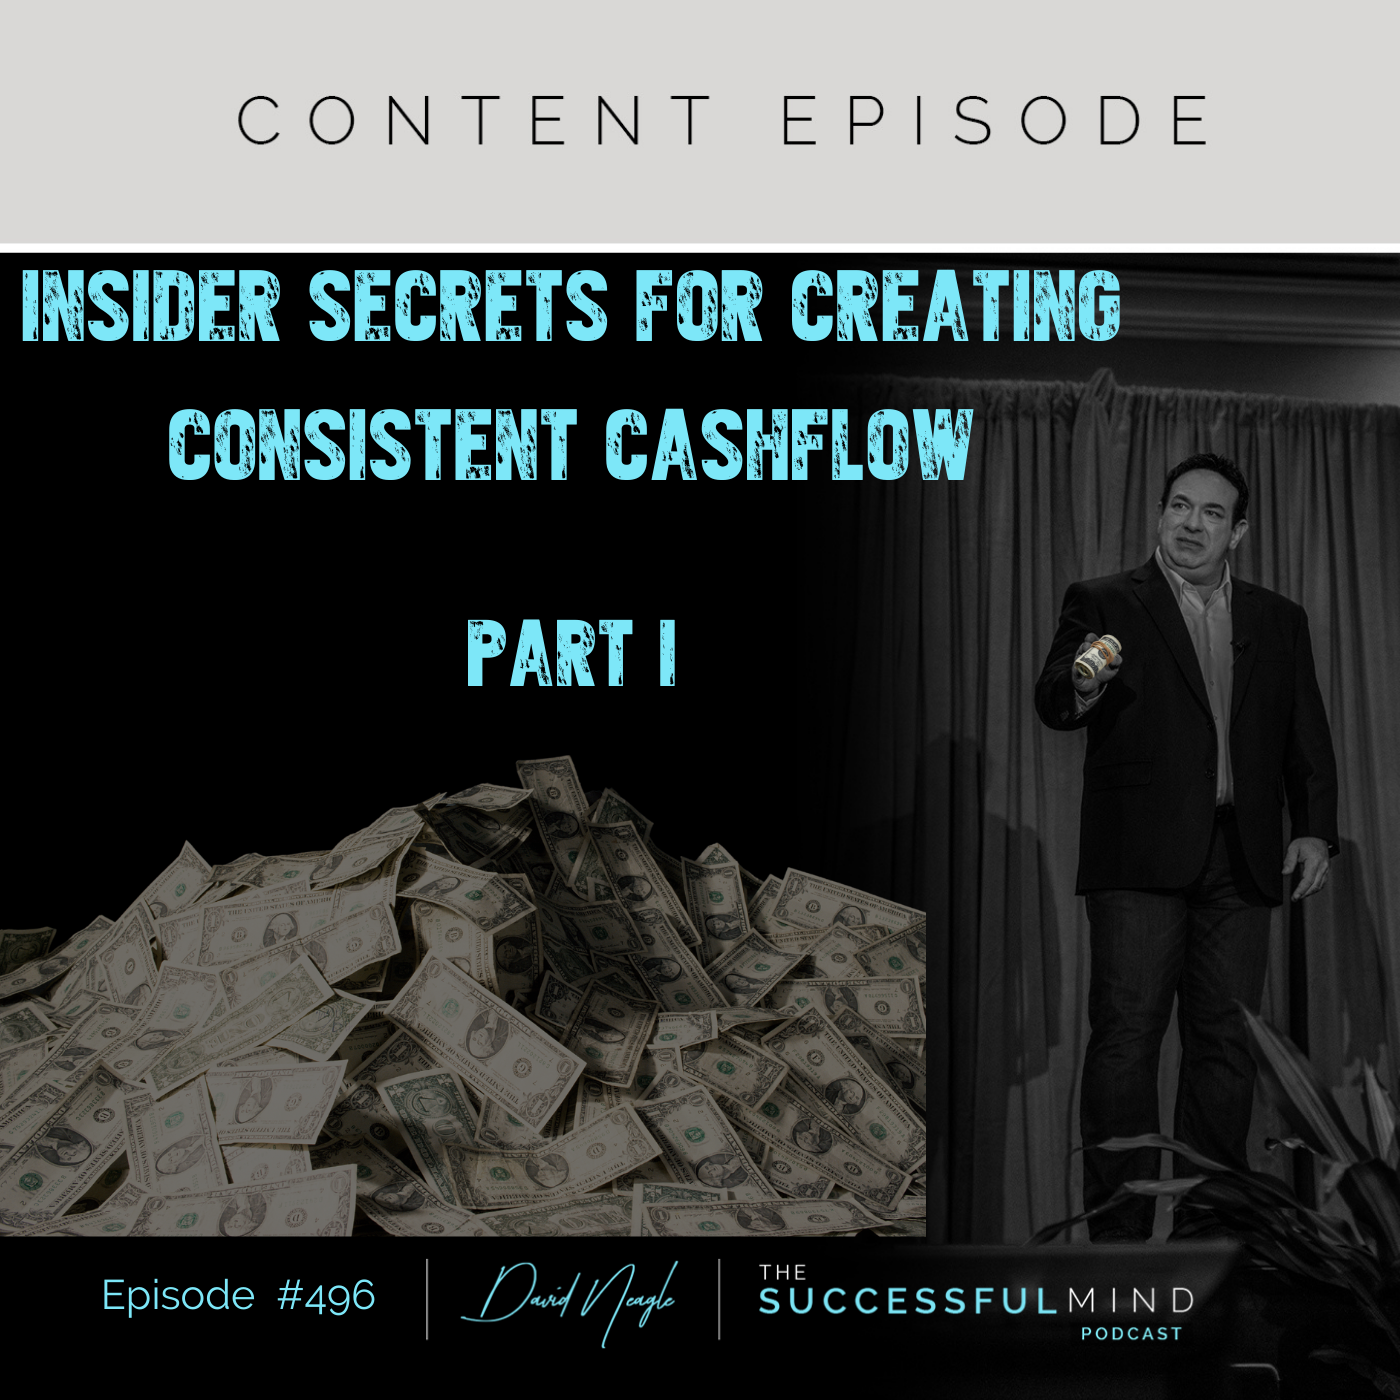 The Successful Mind Podcast - Episode 496 - Insider Secrets for Creating Consistent Cashflow - Part I